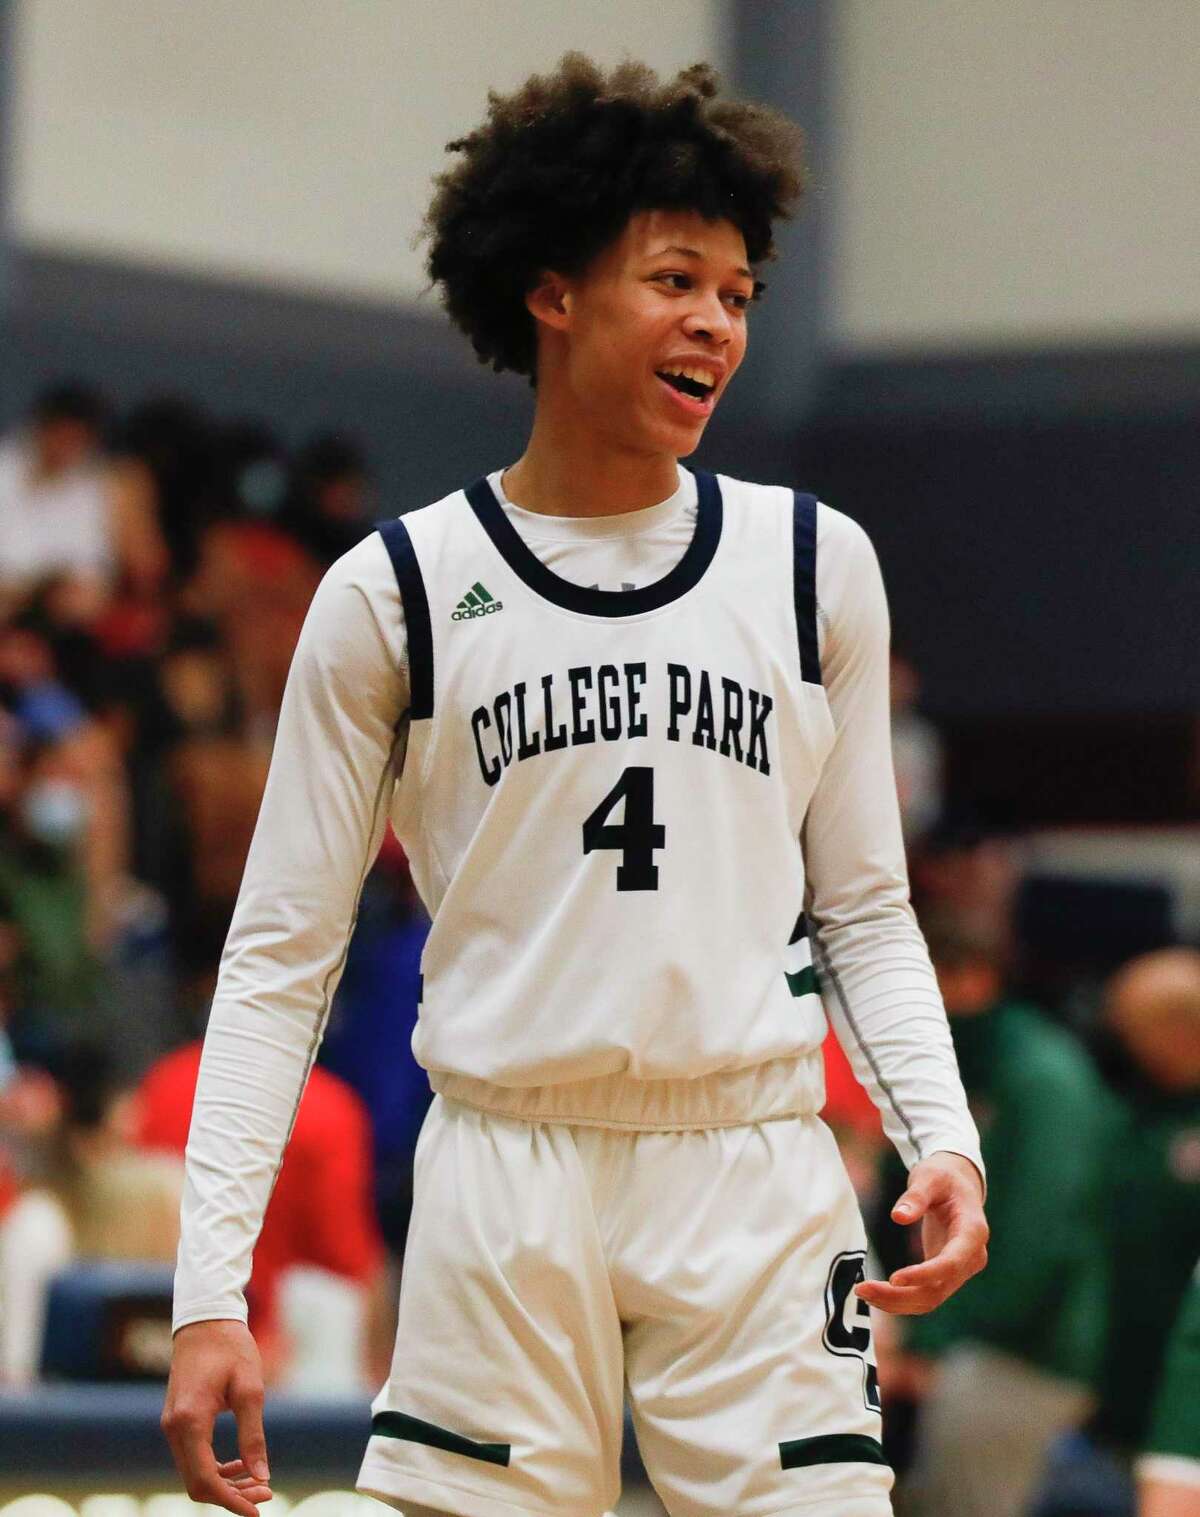 College Park guard Darel Reece (4) jokes with teammates during the second quarter of a District 15-6A high school basketball game at College Park High School, Saturday, Jan. 23, 2021, in The Woodlands.